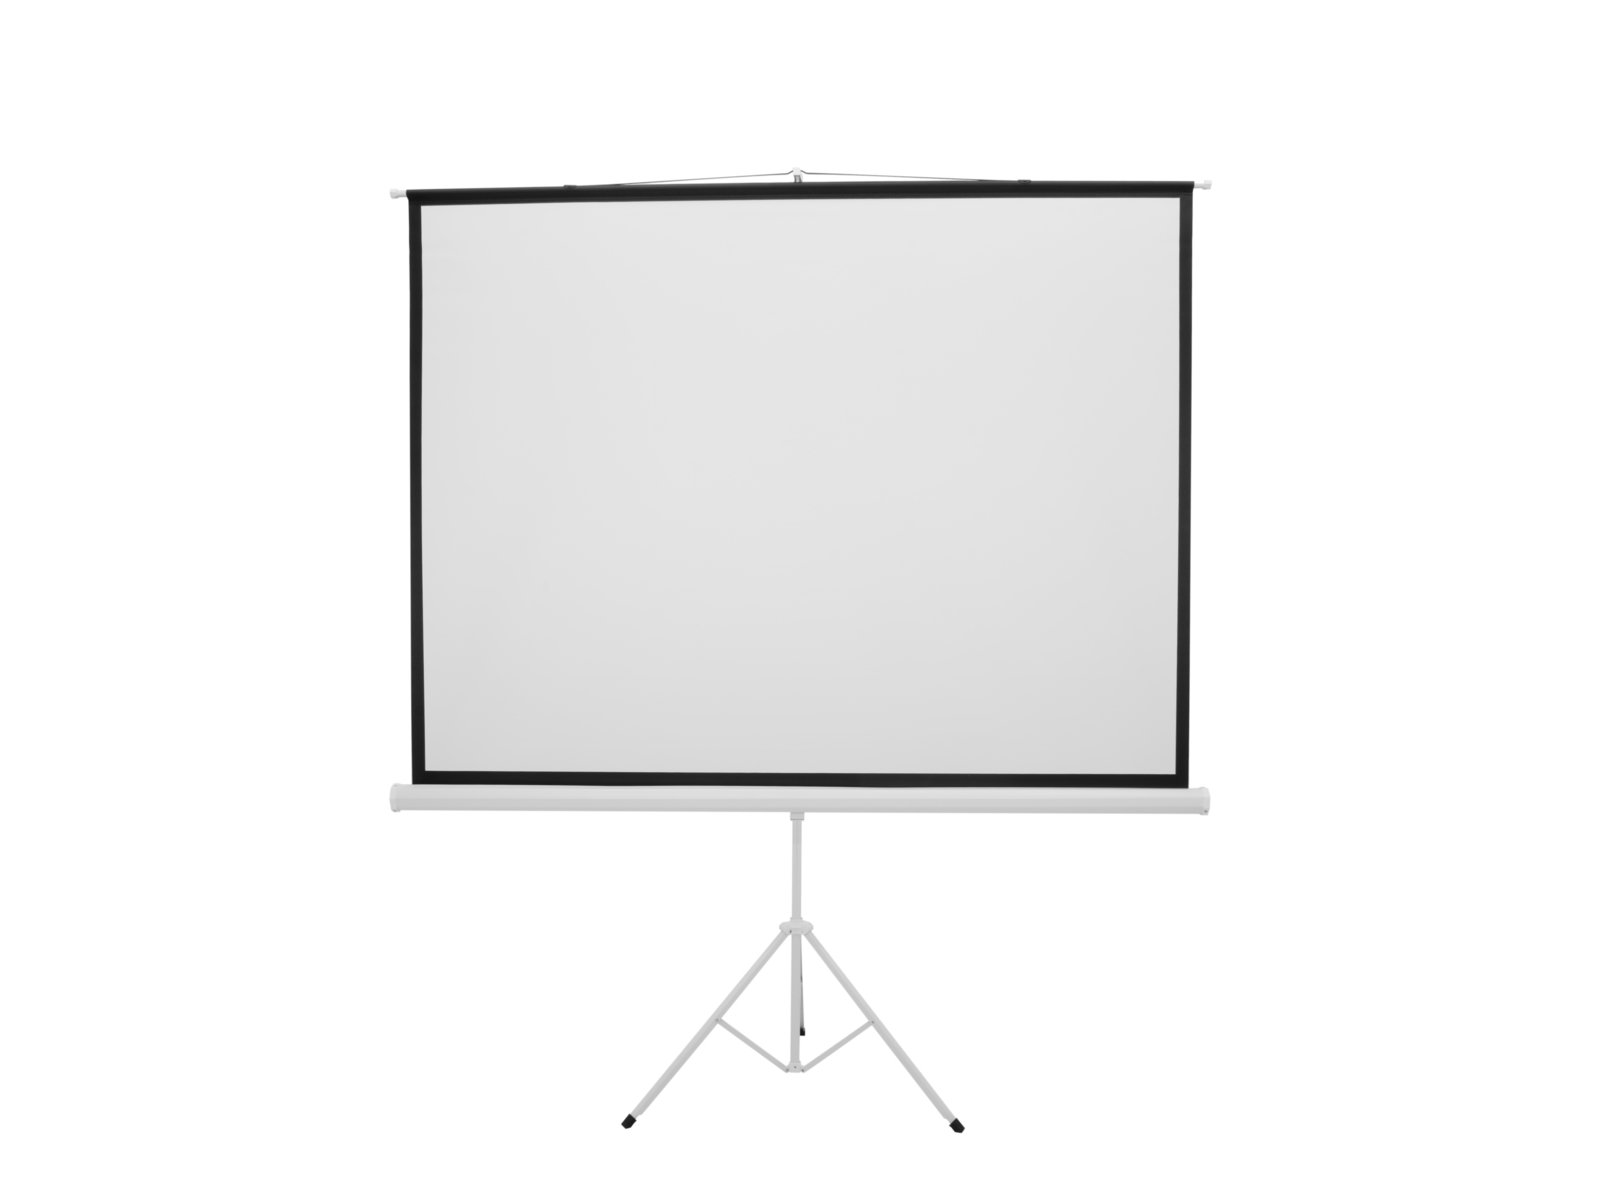 EUROLITE Projection Screen 4:3, 2×1.5m with stand